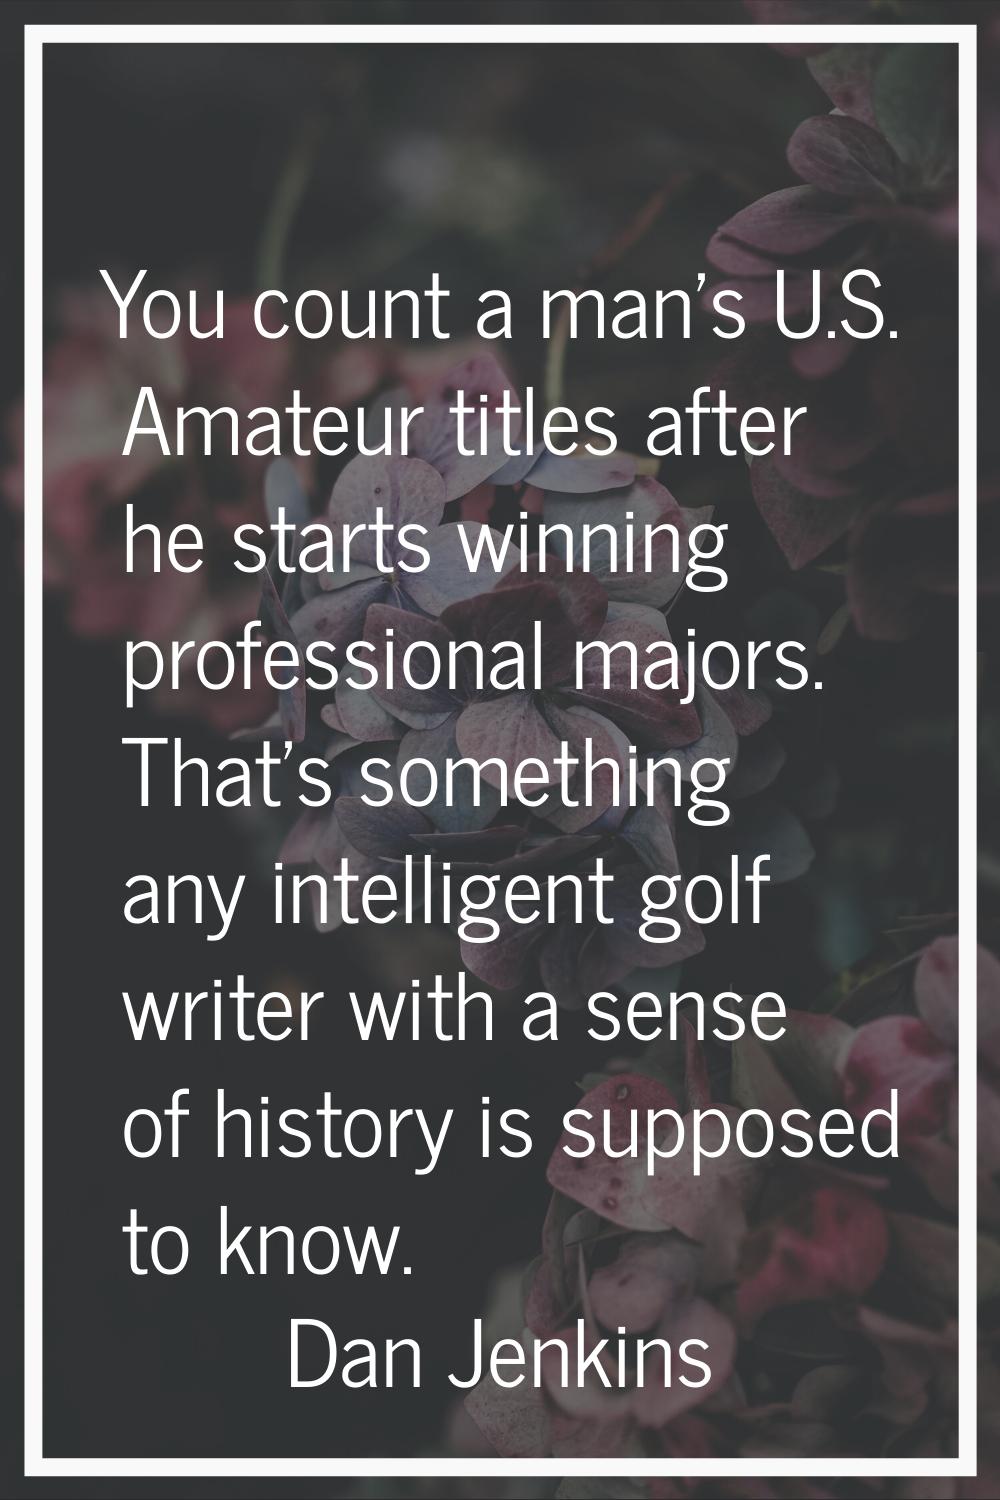 You count a man's U.S. Amateur titles after he starts winning professional majors. That's something